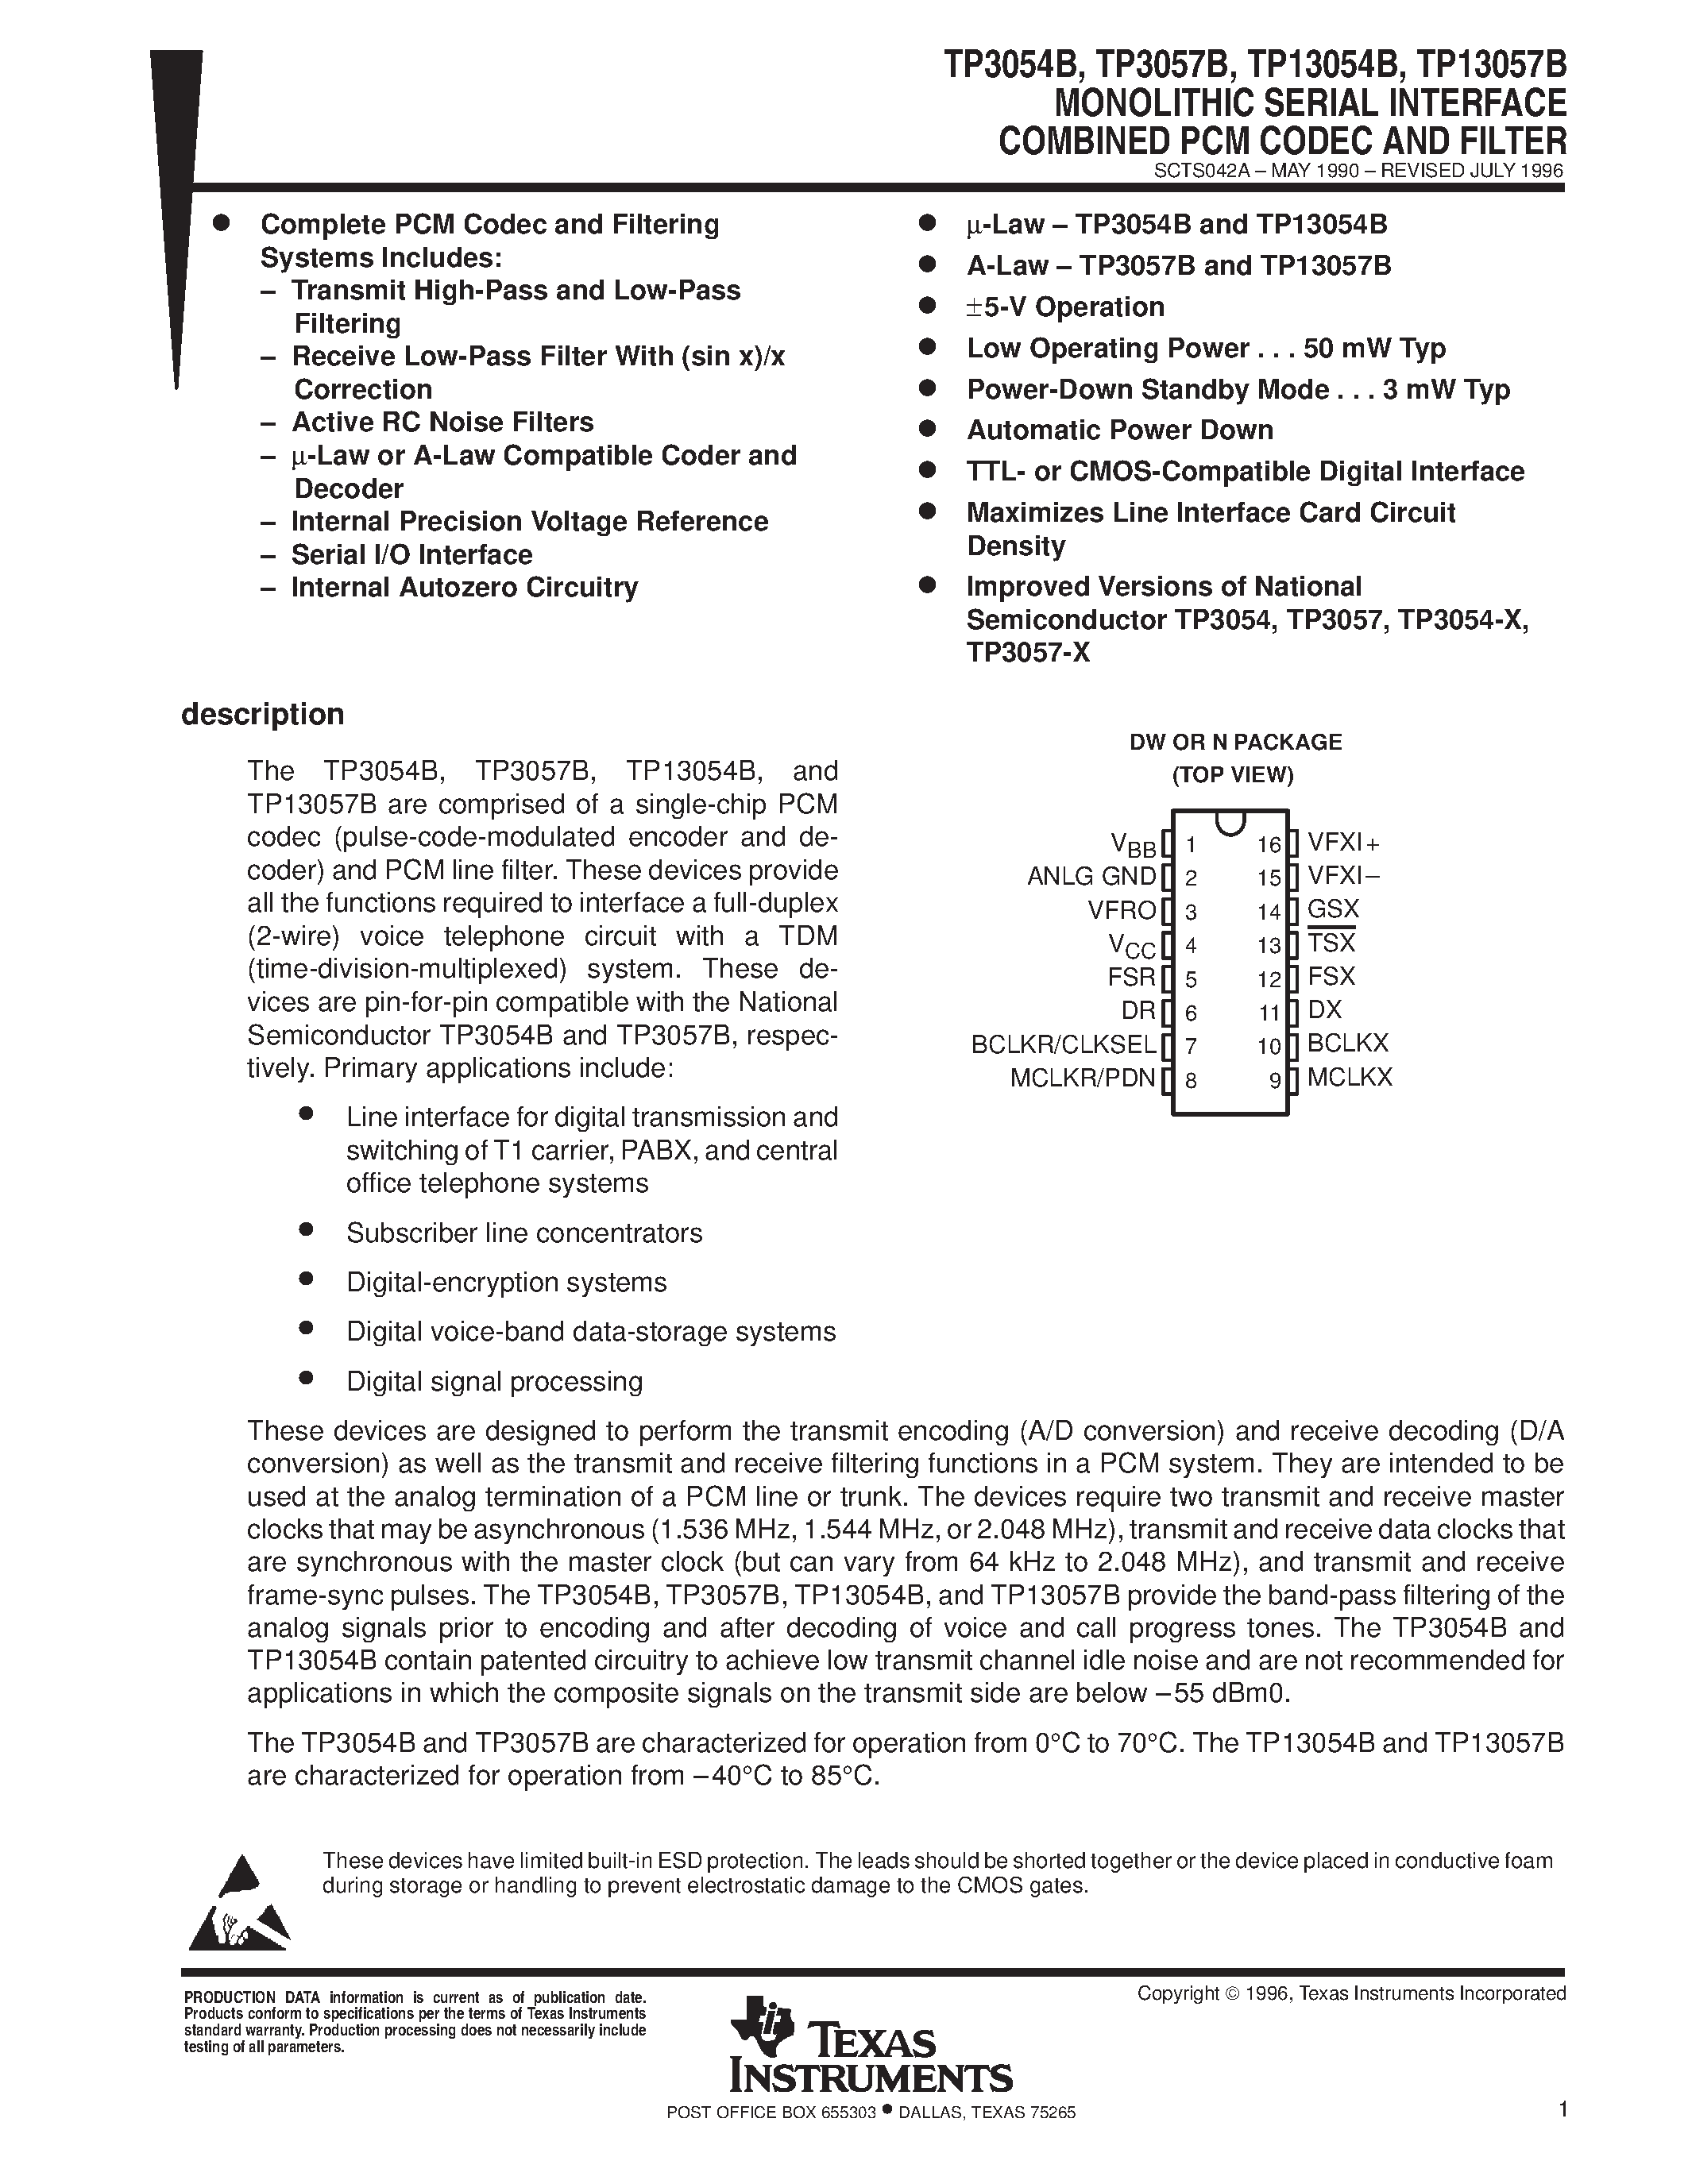 Datasheet TP13057B - MONOLITHIC SERIAL INTERFACE COMBINED PCM CODEC AND FILTER page 1